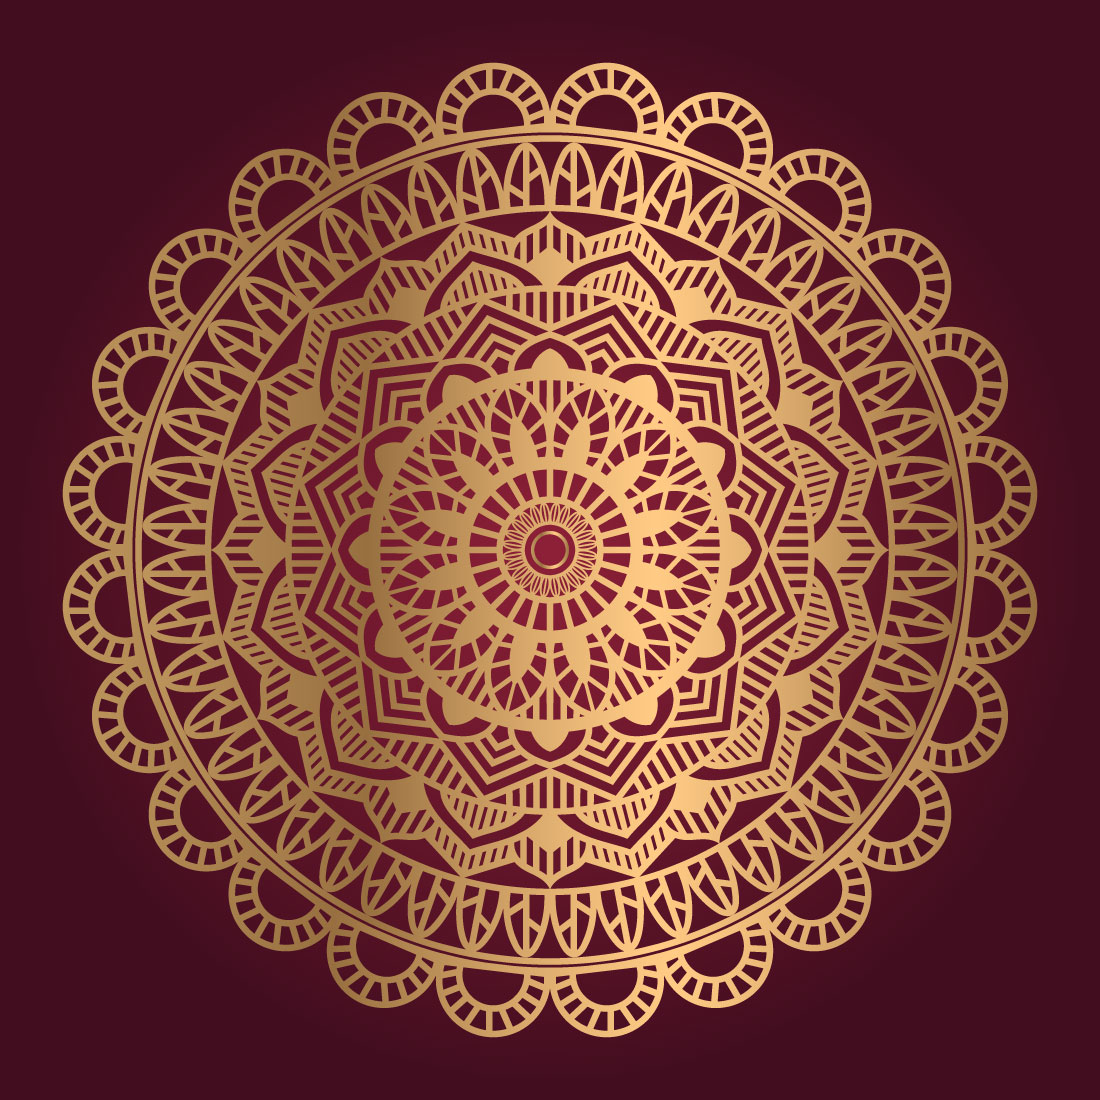 Luxury Mandala Vector with Golden Style Background cover image.